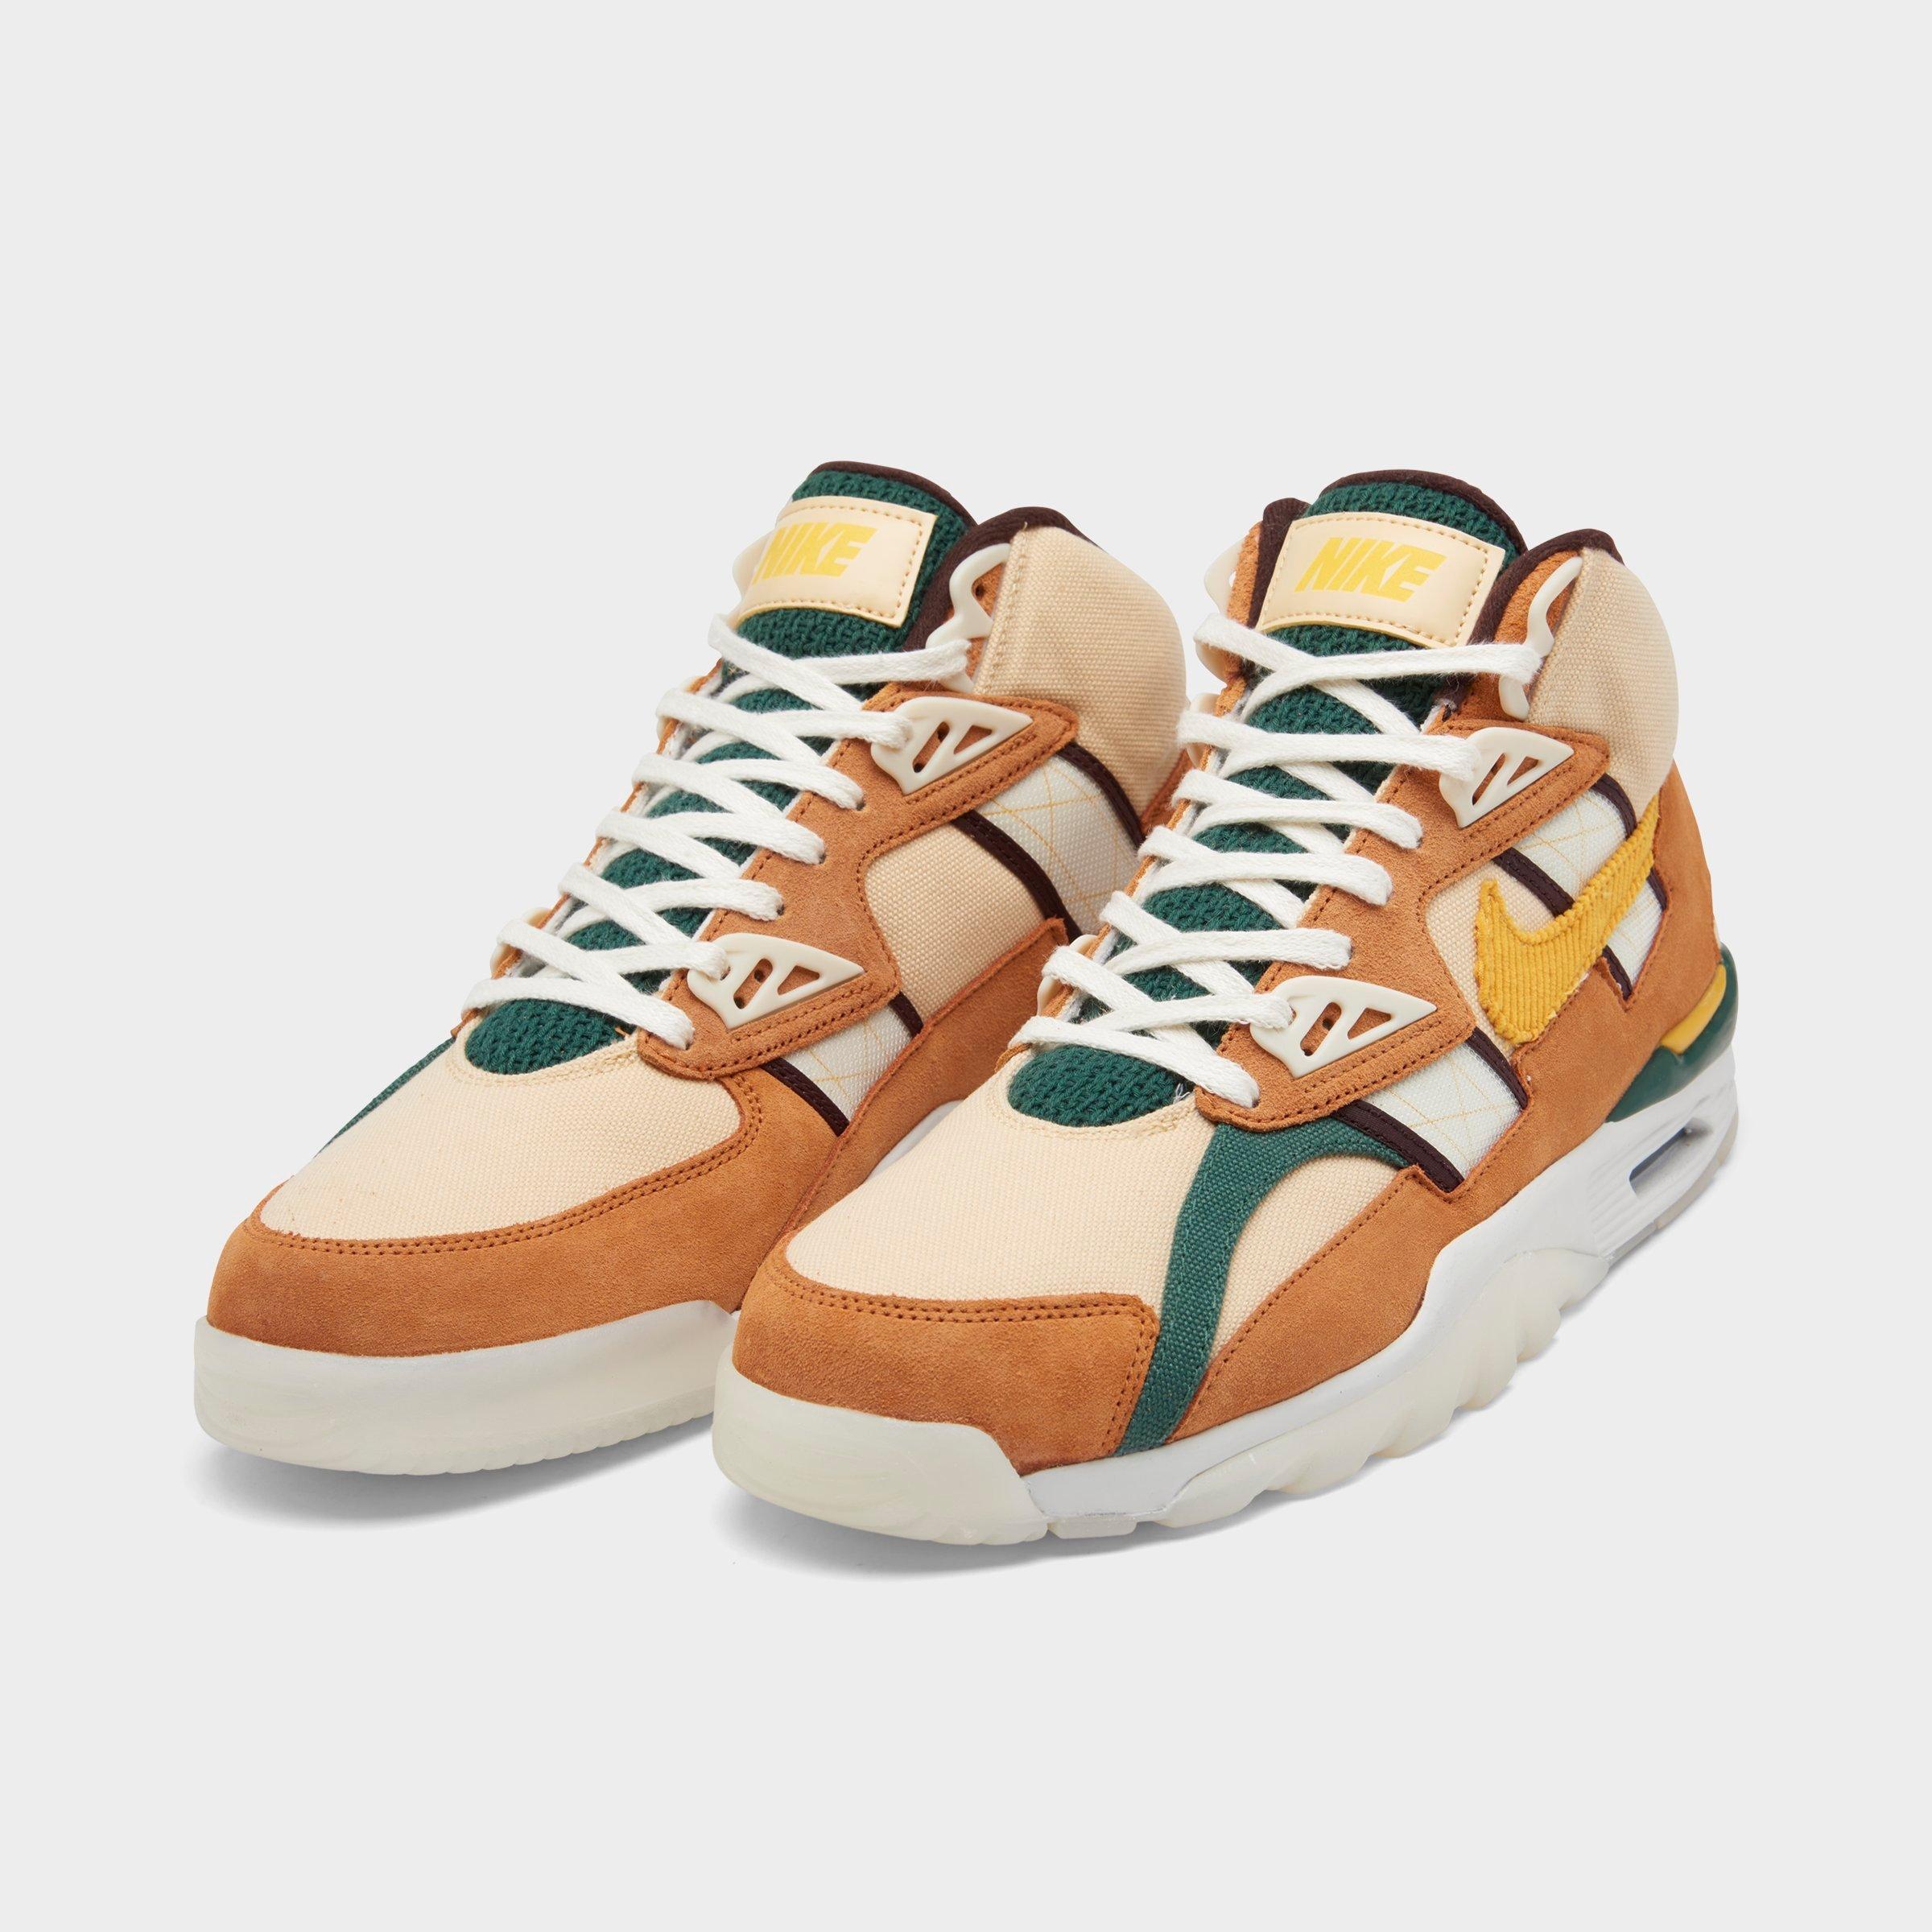 nike air trainer 3 finish line